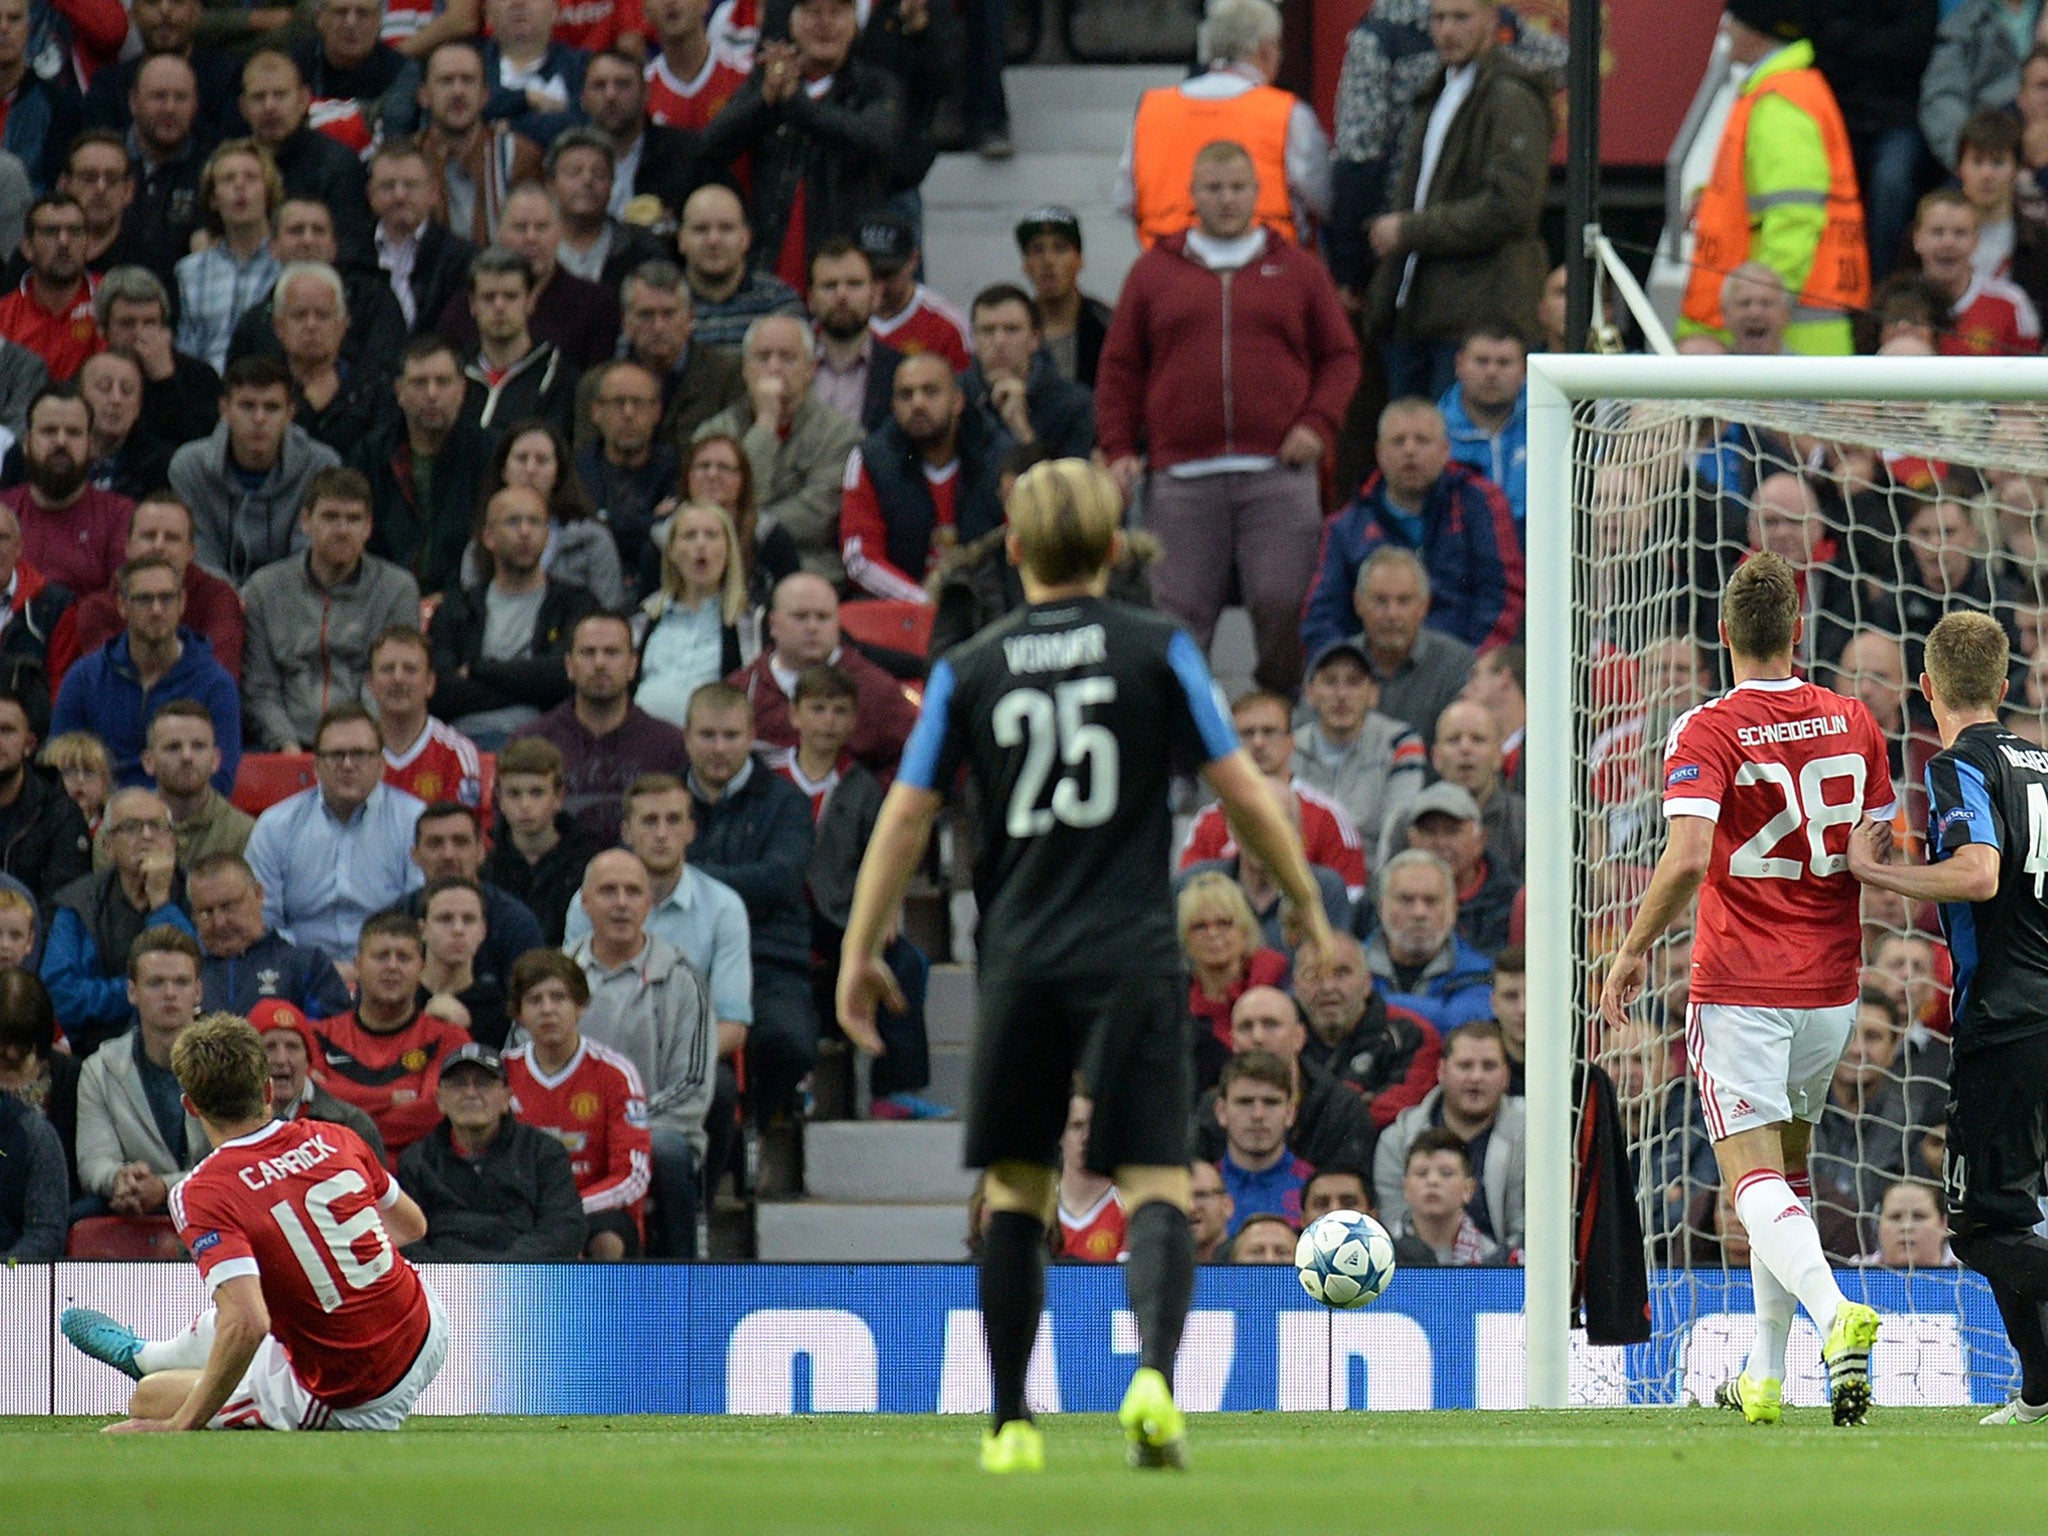 Michael Carrick scores an own goal at Old Trafford against Club Brugge